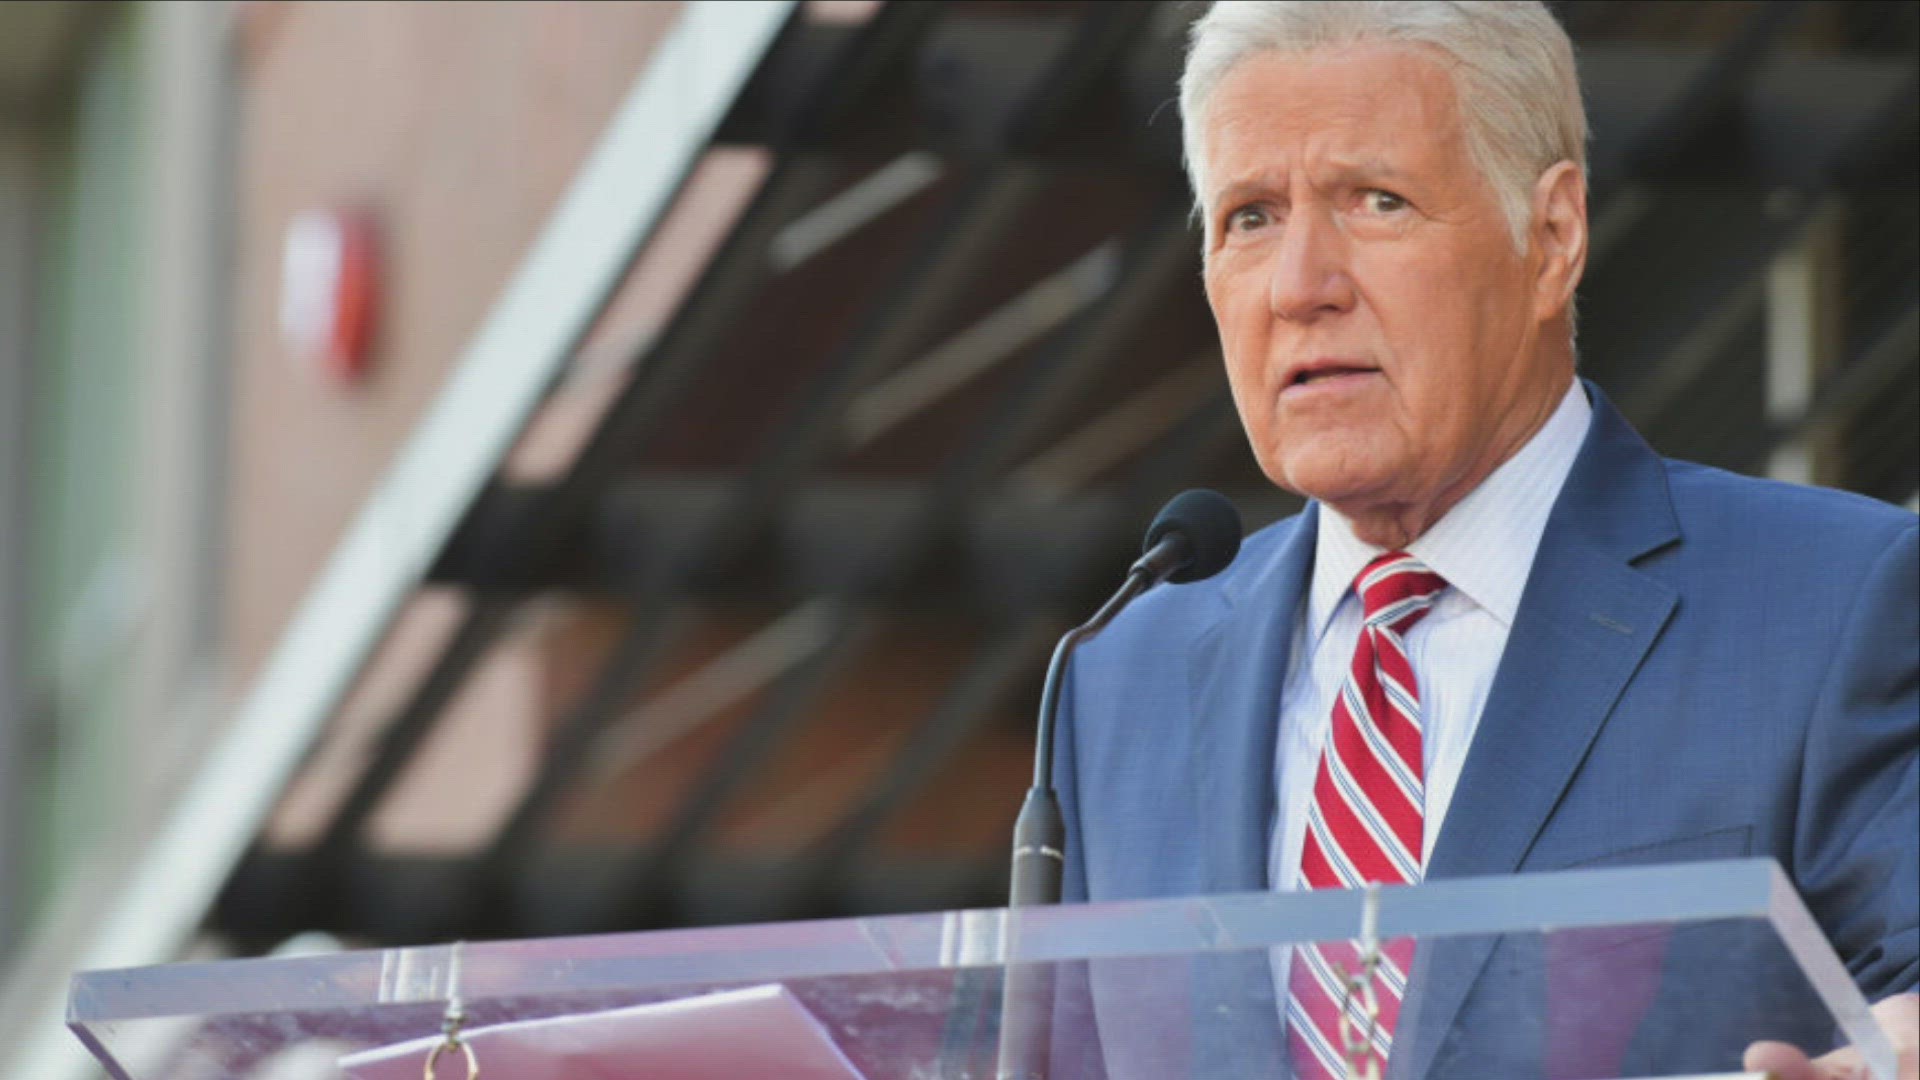 It's been a year since Alex Trebek was diagnosed with stage 4 pancreatic cancer. The Jeopardy host is now speaking out.